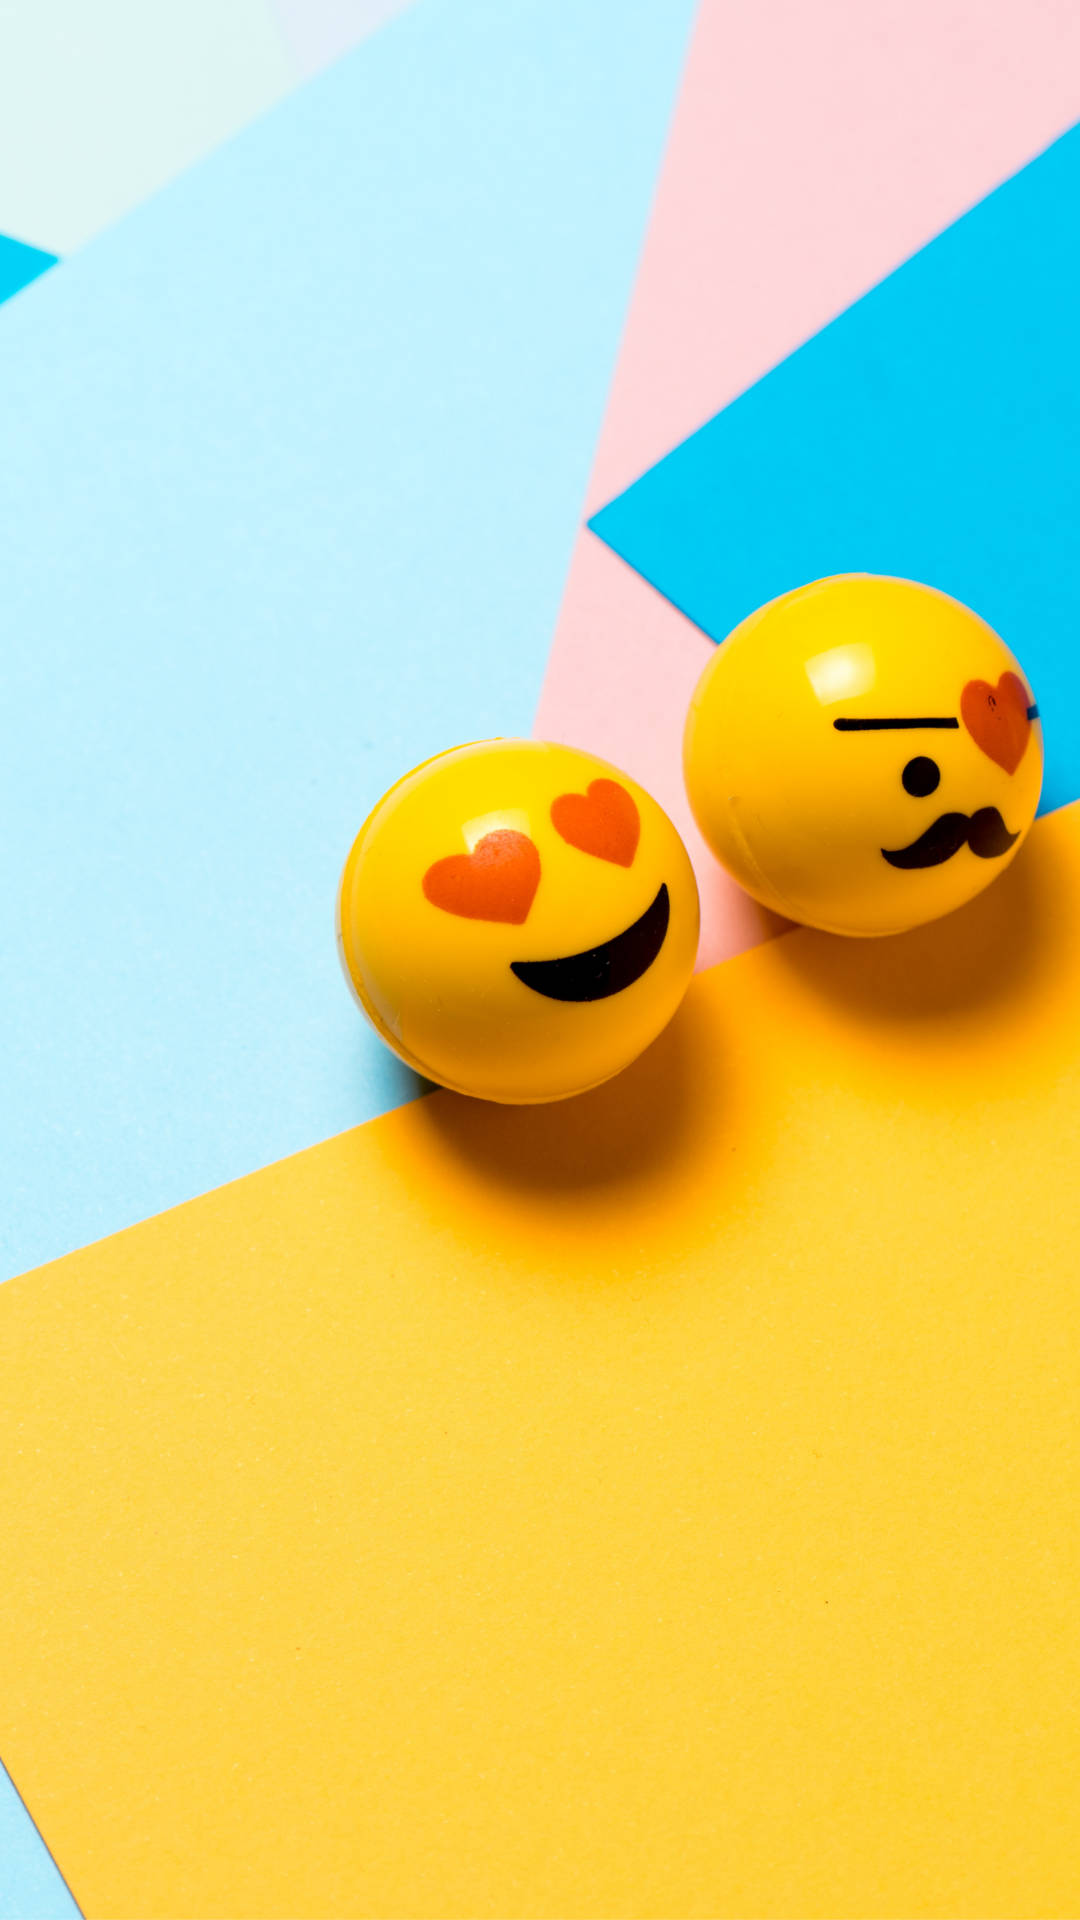 download the best cute emoji wallpaper hd for your phone screen